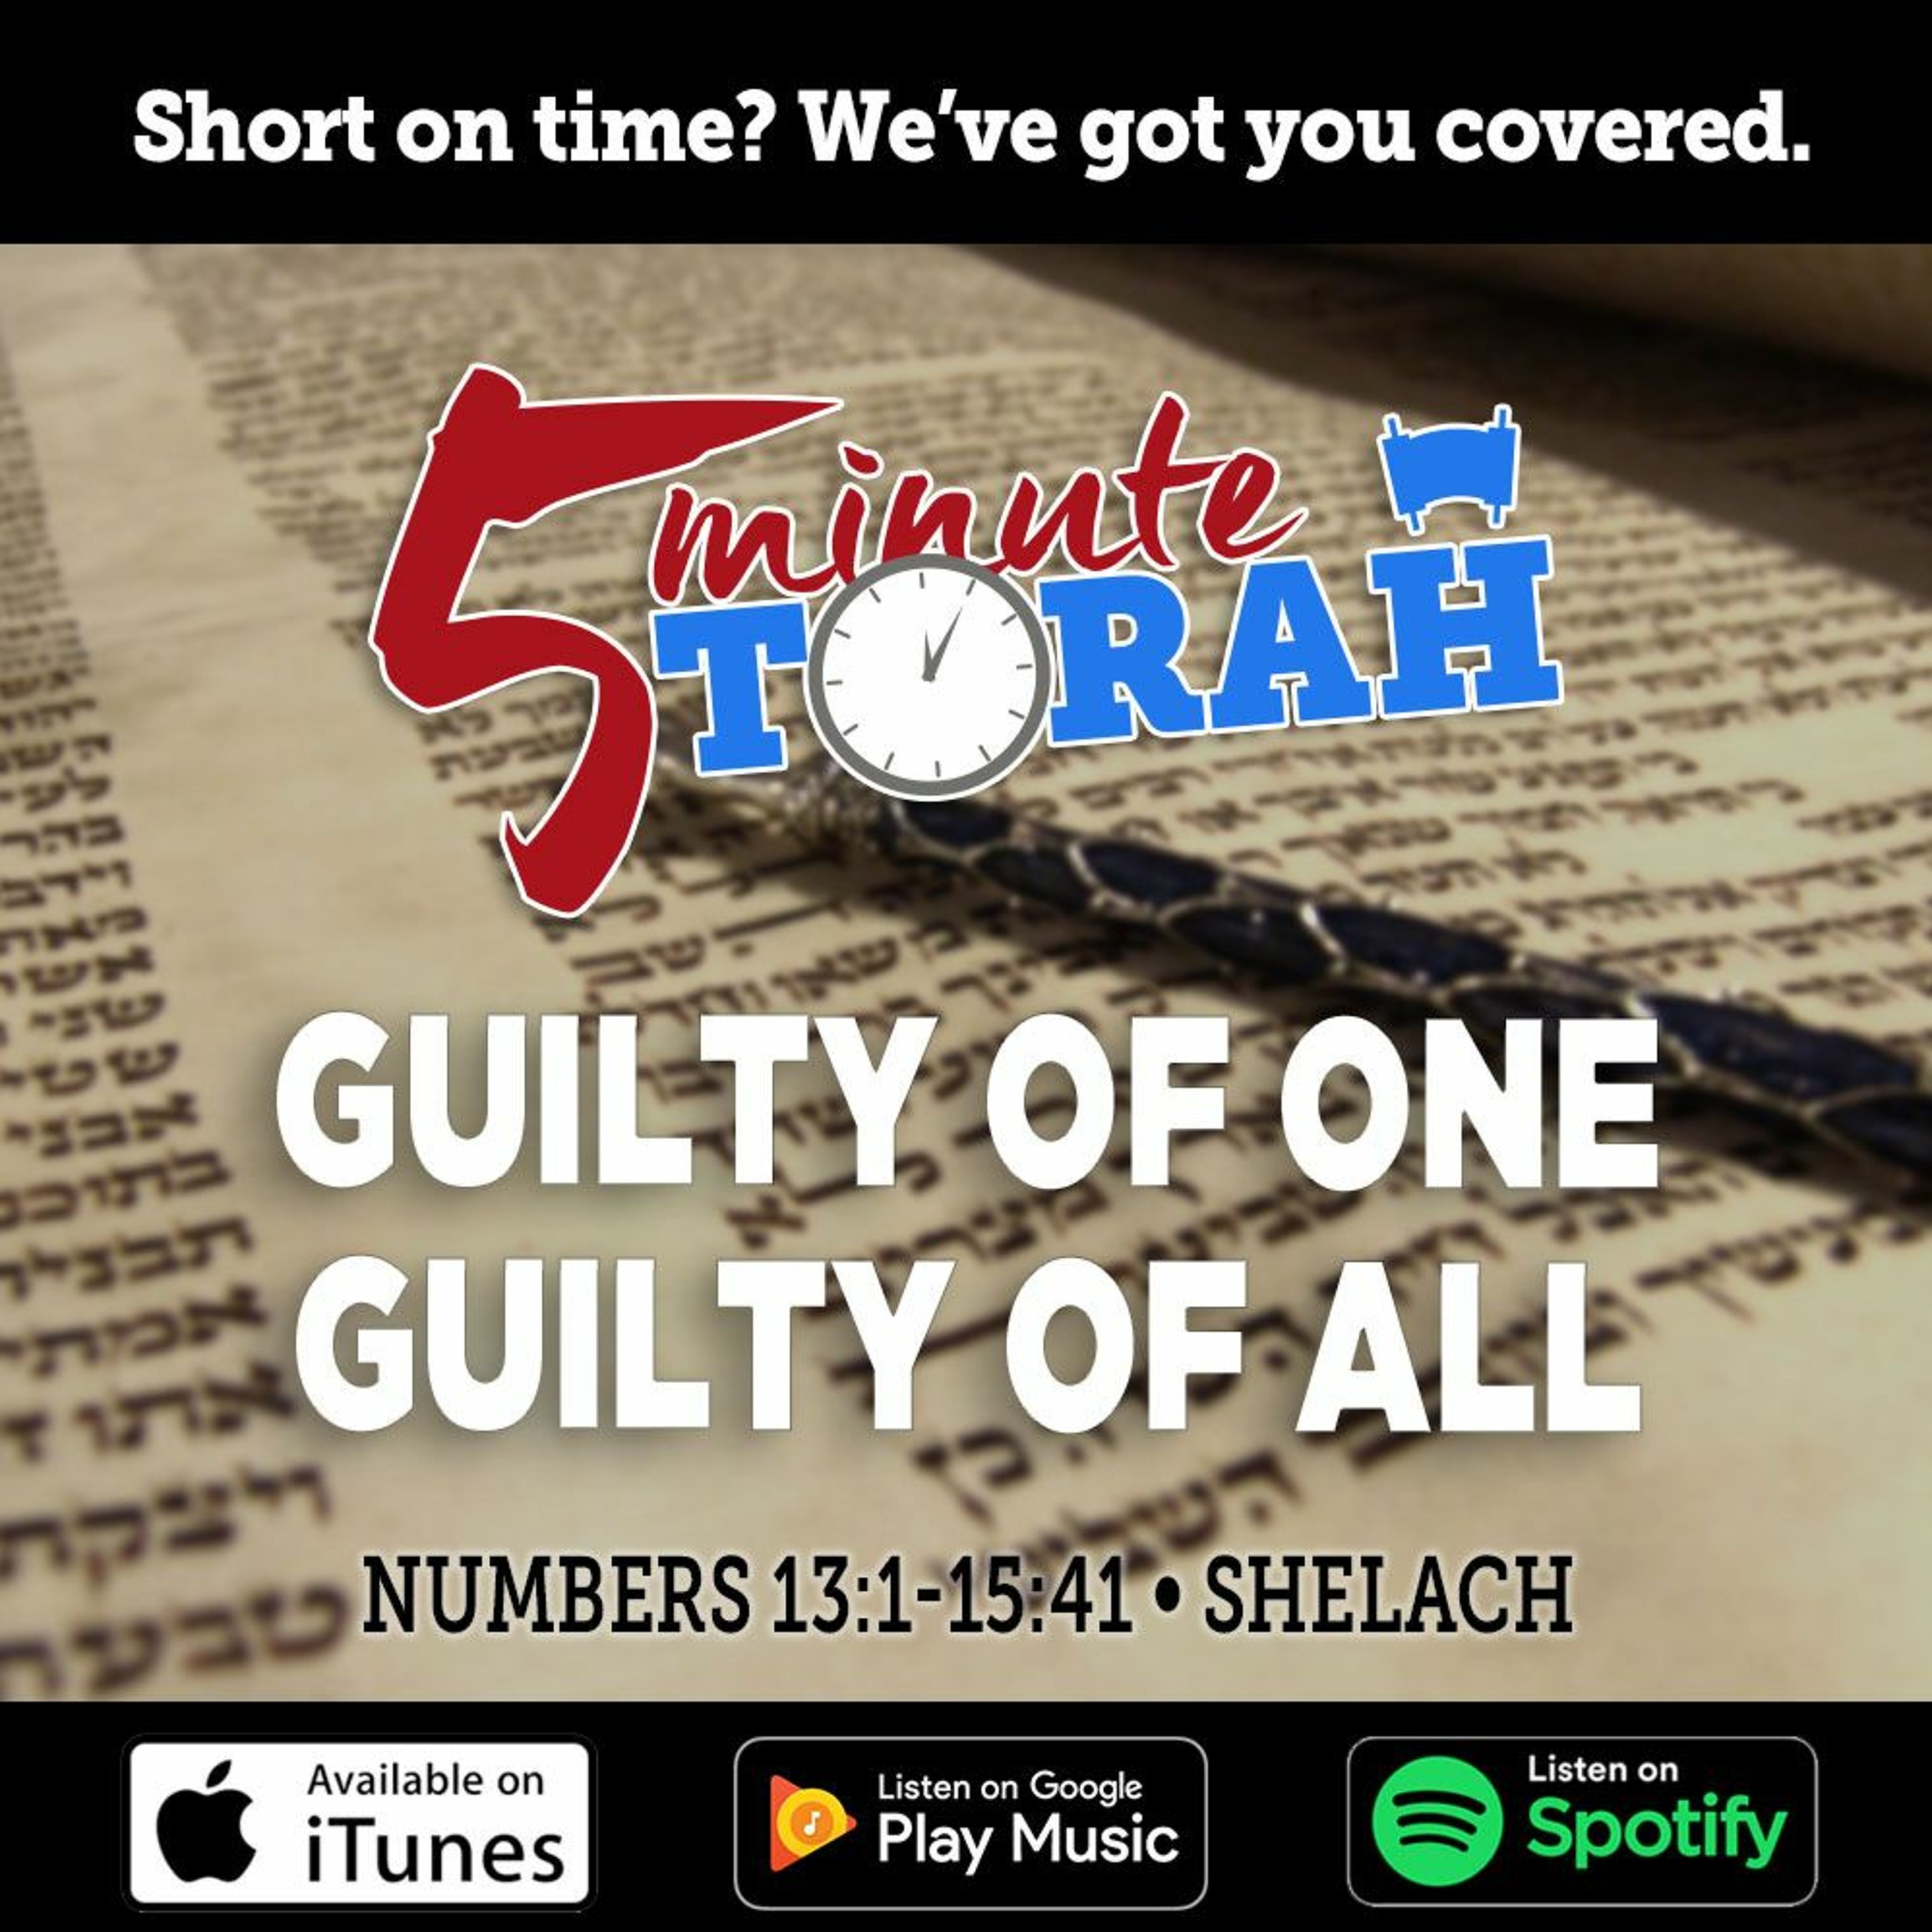 Shelach - Guilty of One, Guilty of All